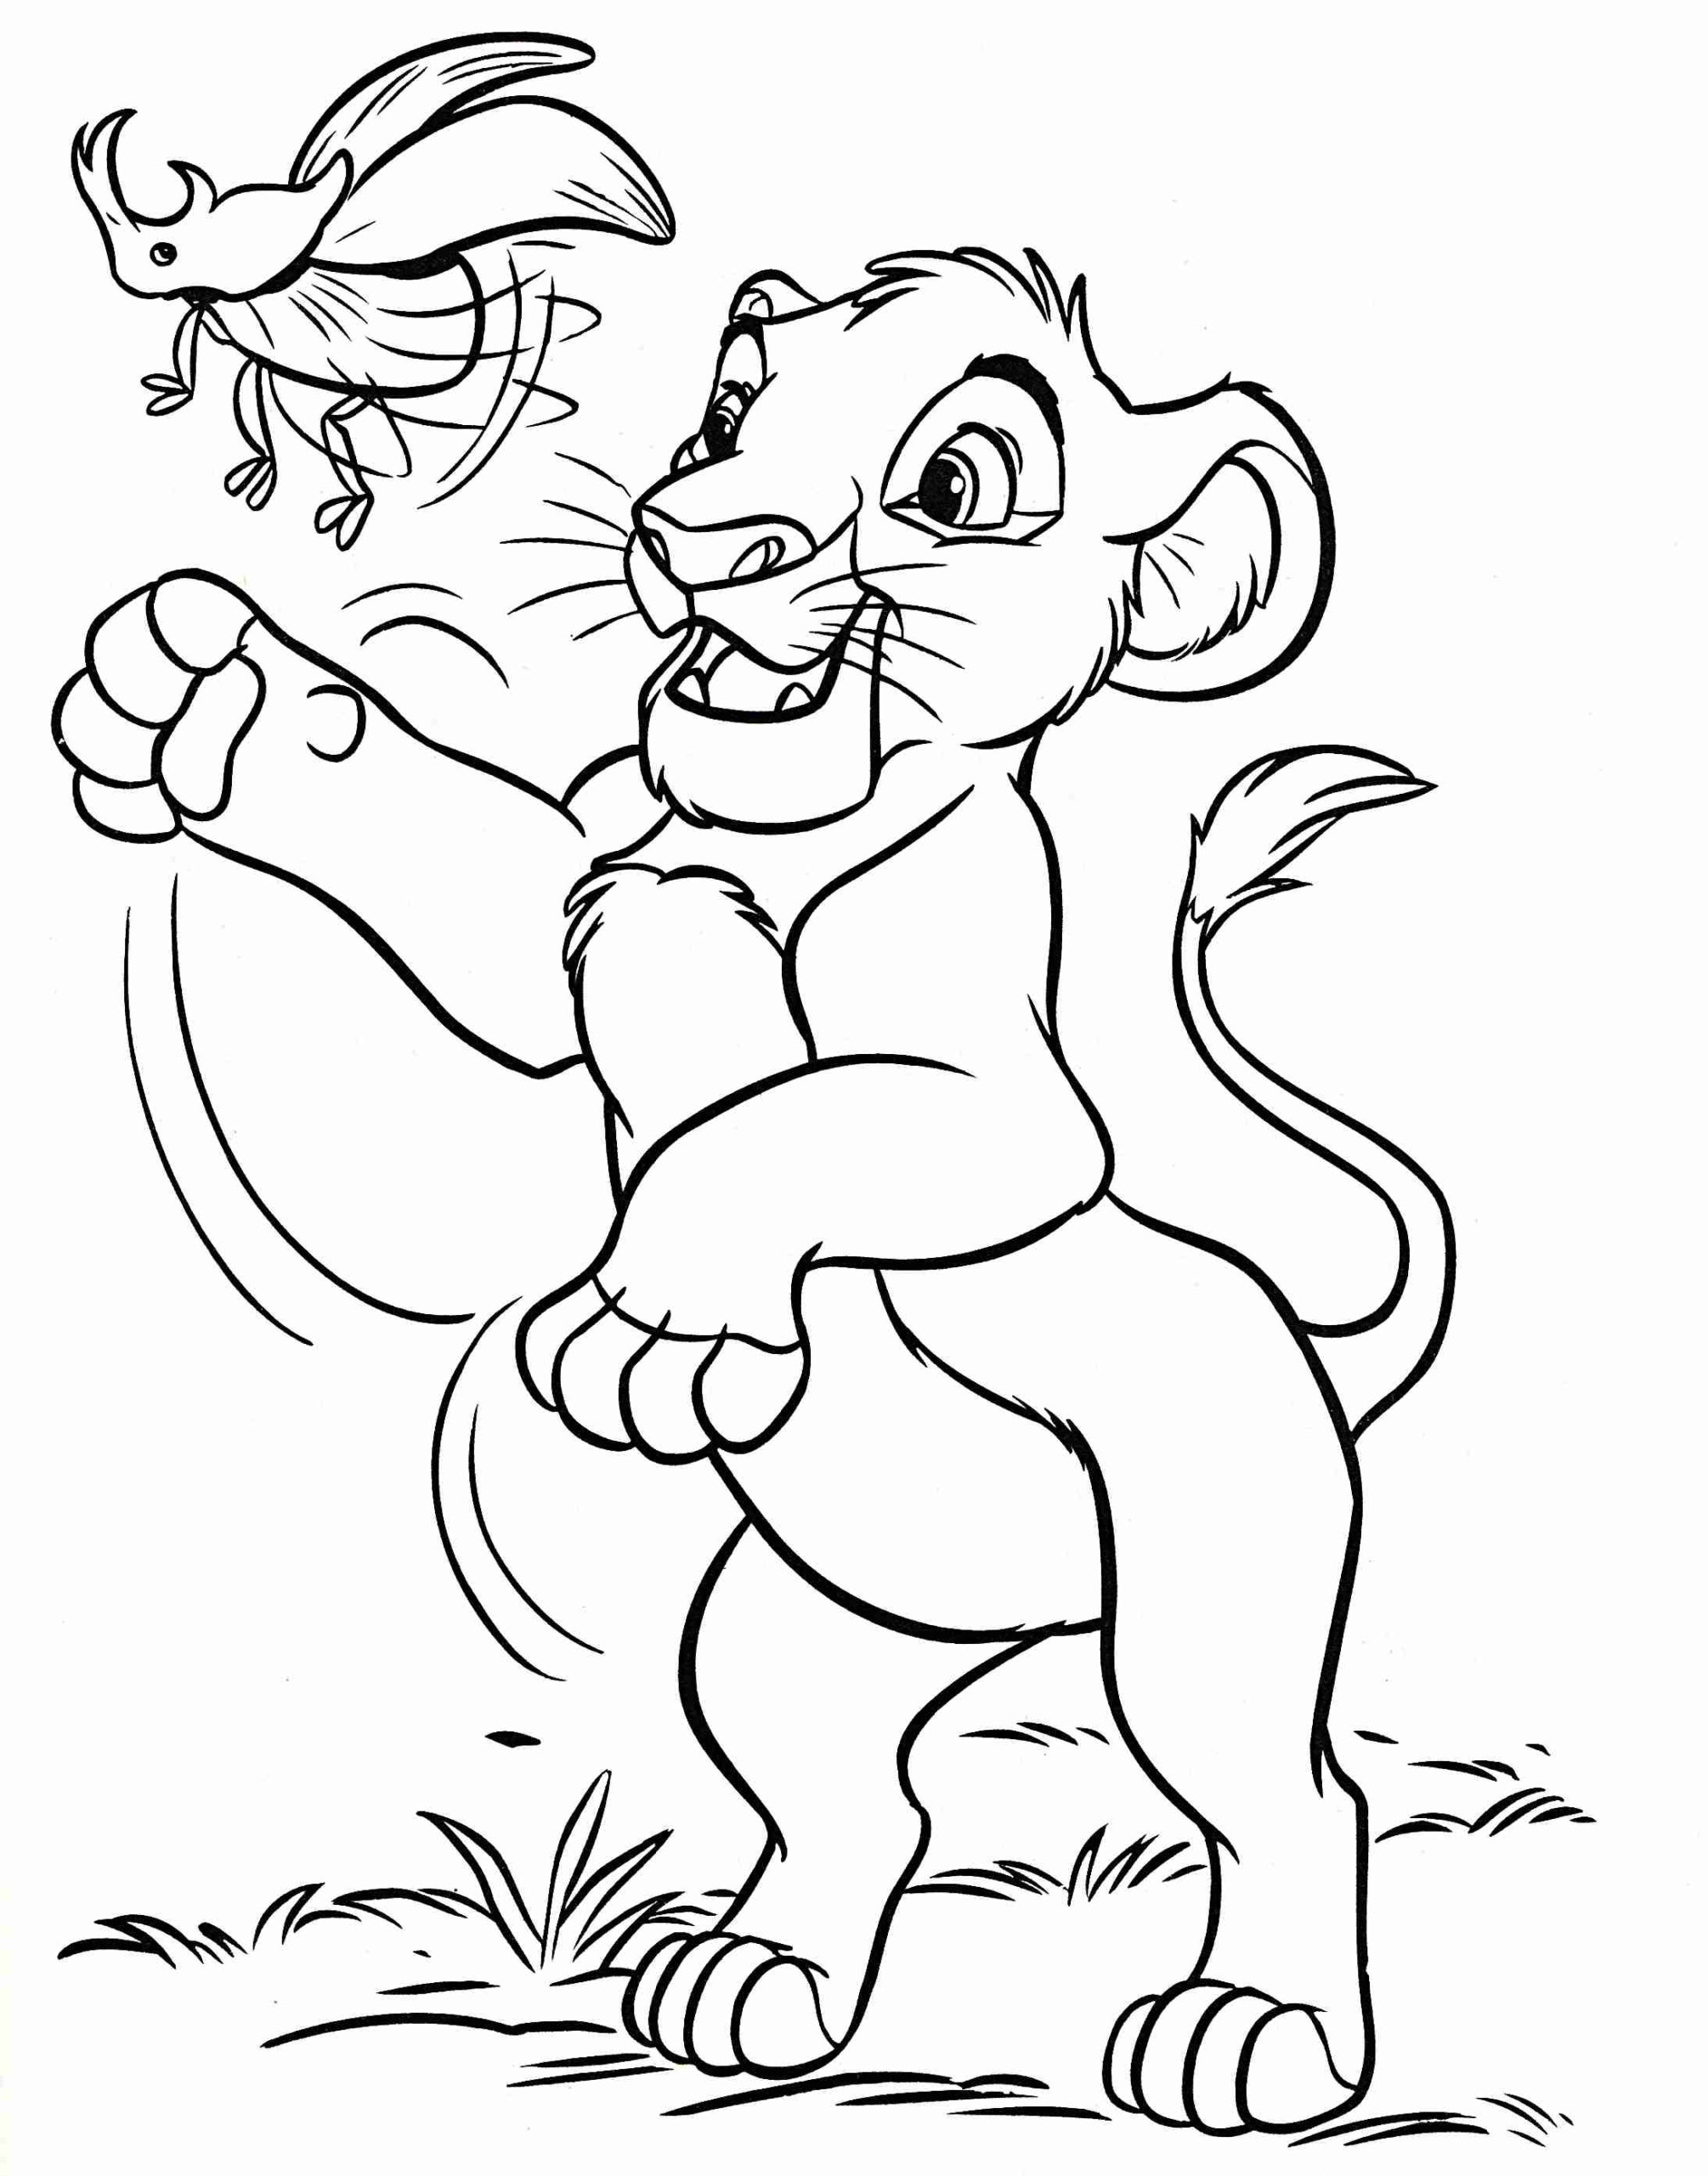 Baby Simba Coloring Pages At Getcolorings | Free Printable encequiconcerne Dessin Simba Bebe